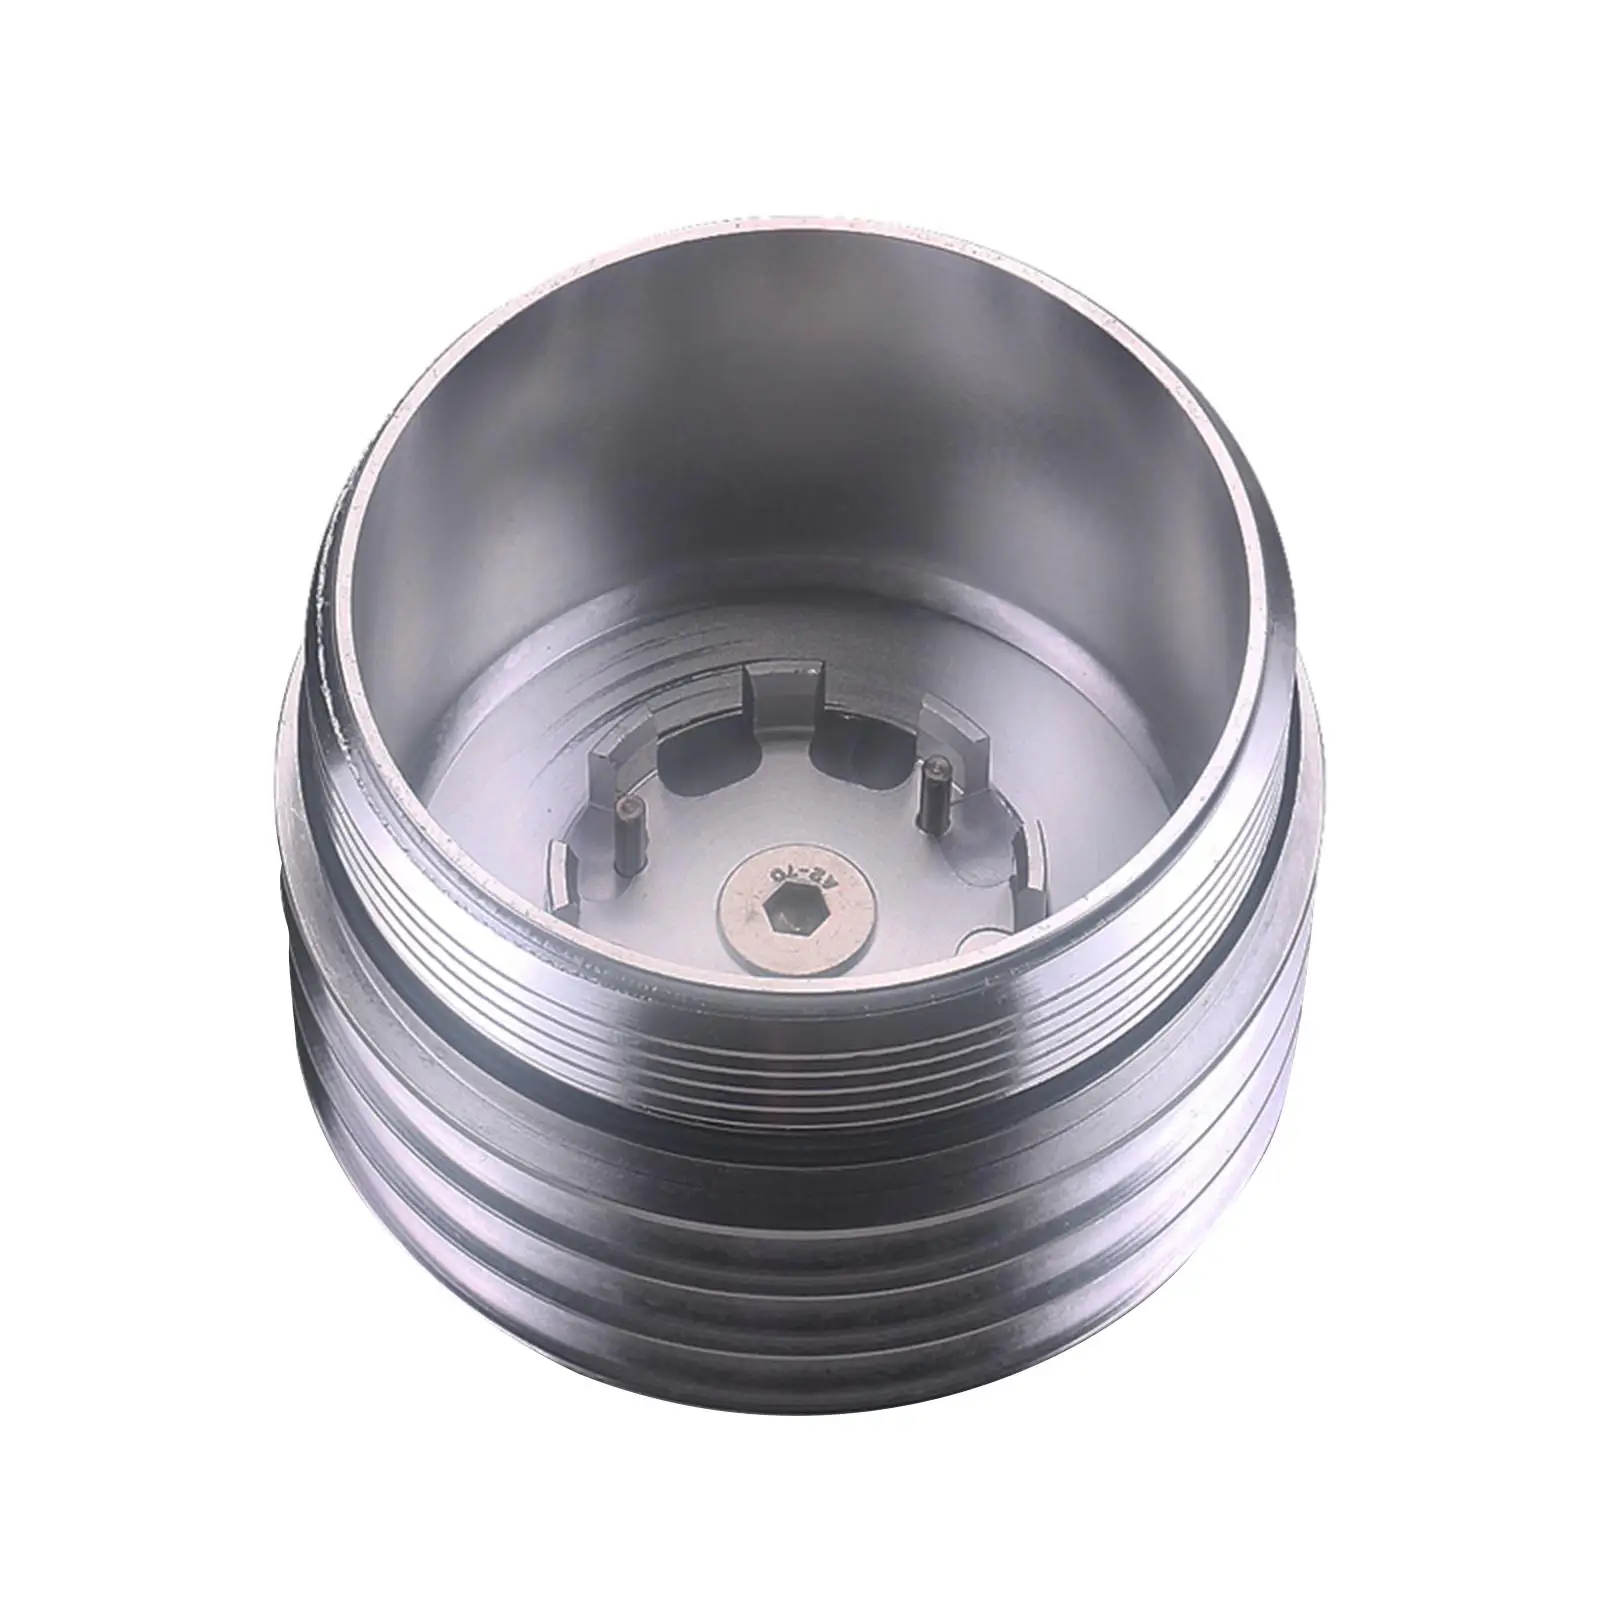 Oil Filter Cover Spare Parts Aluminum Alloy for BMW N54 F30 2.0T Engine